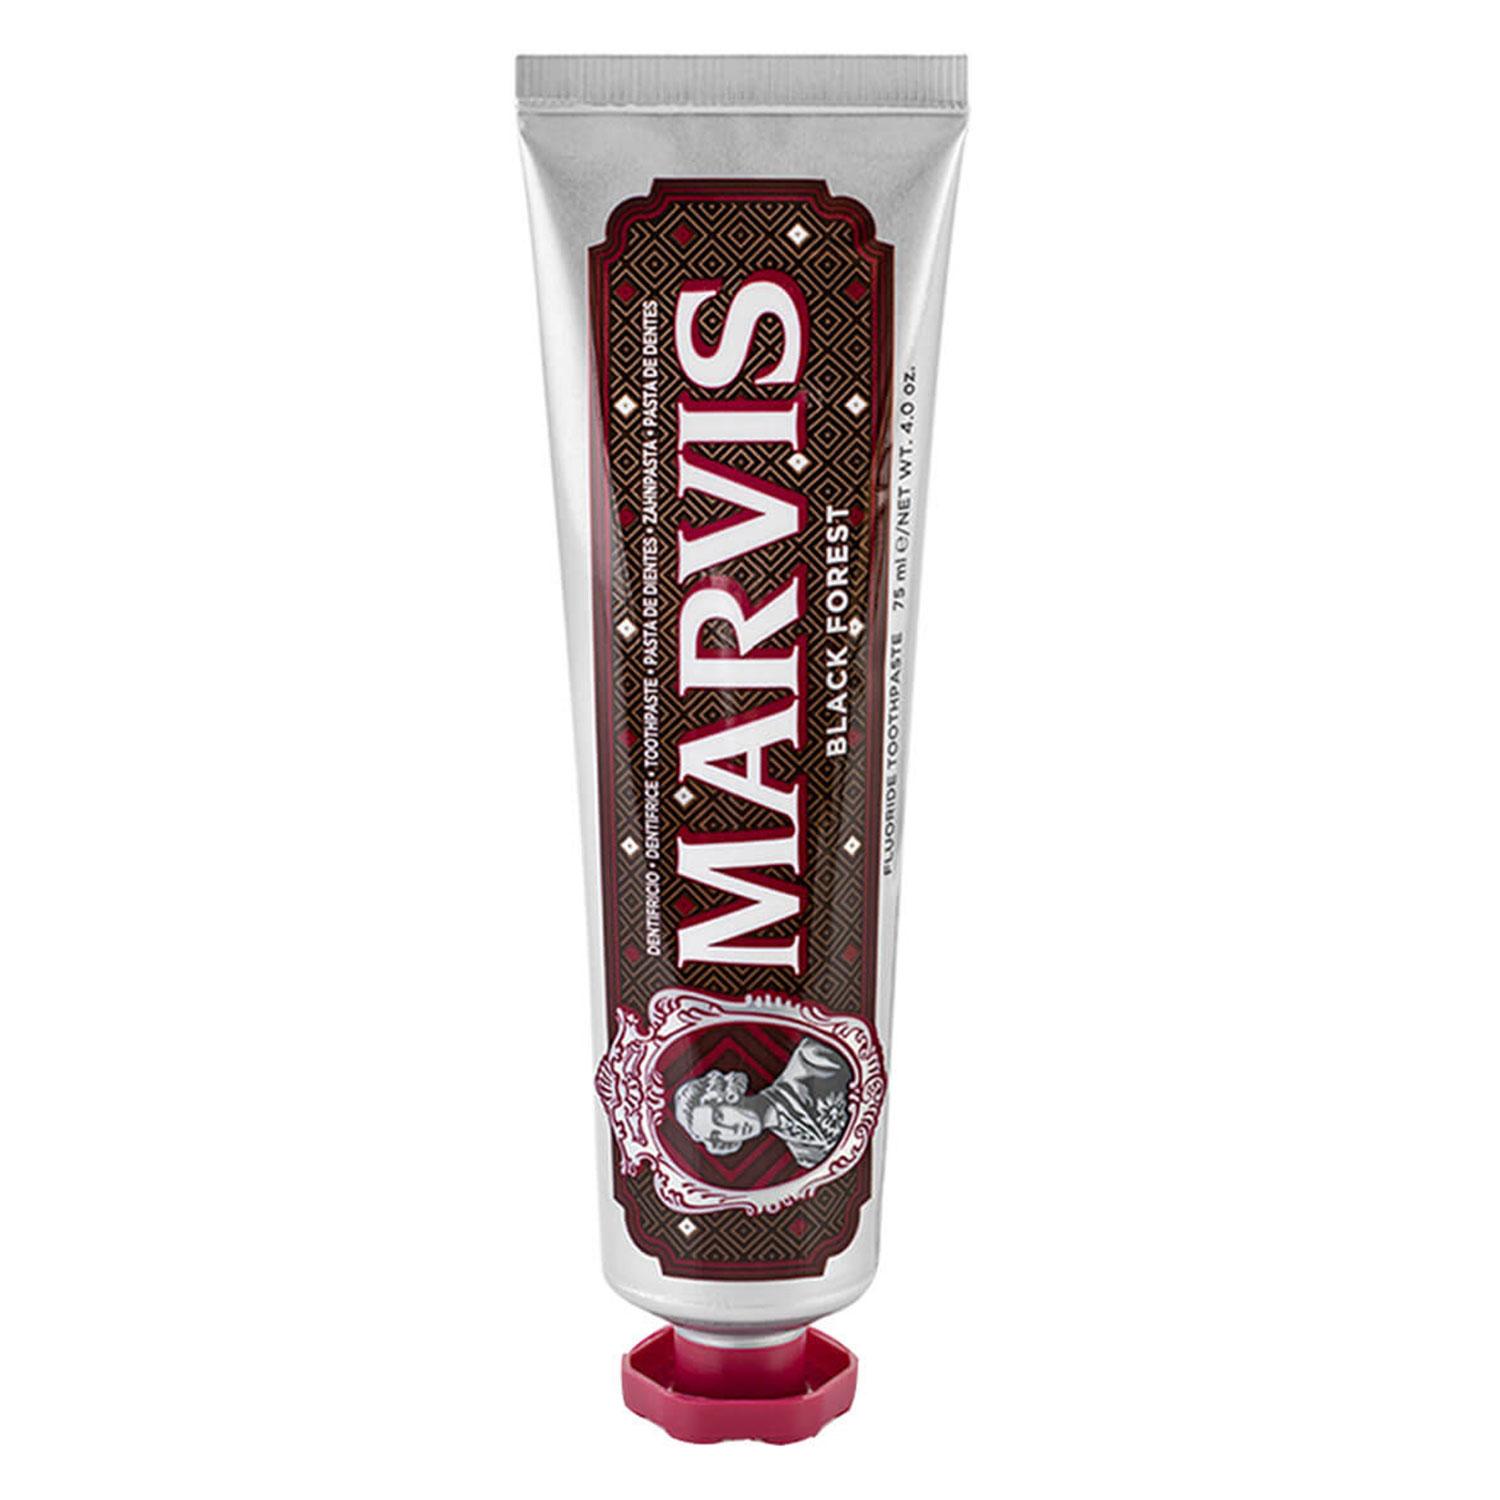 Marvis - Black Forest Toothpaste